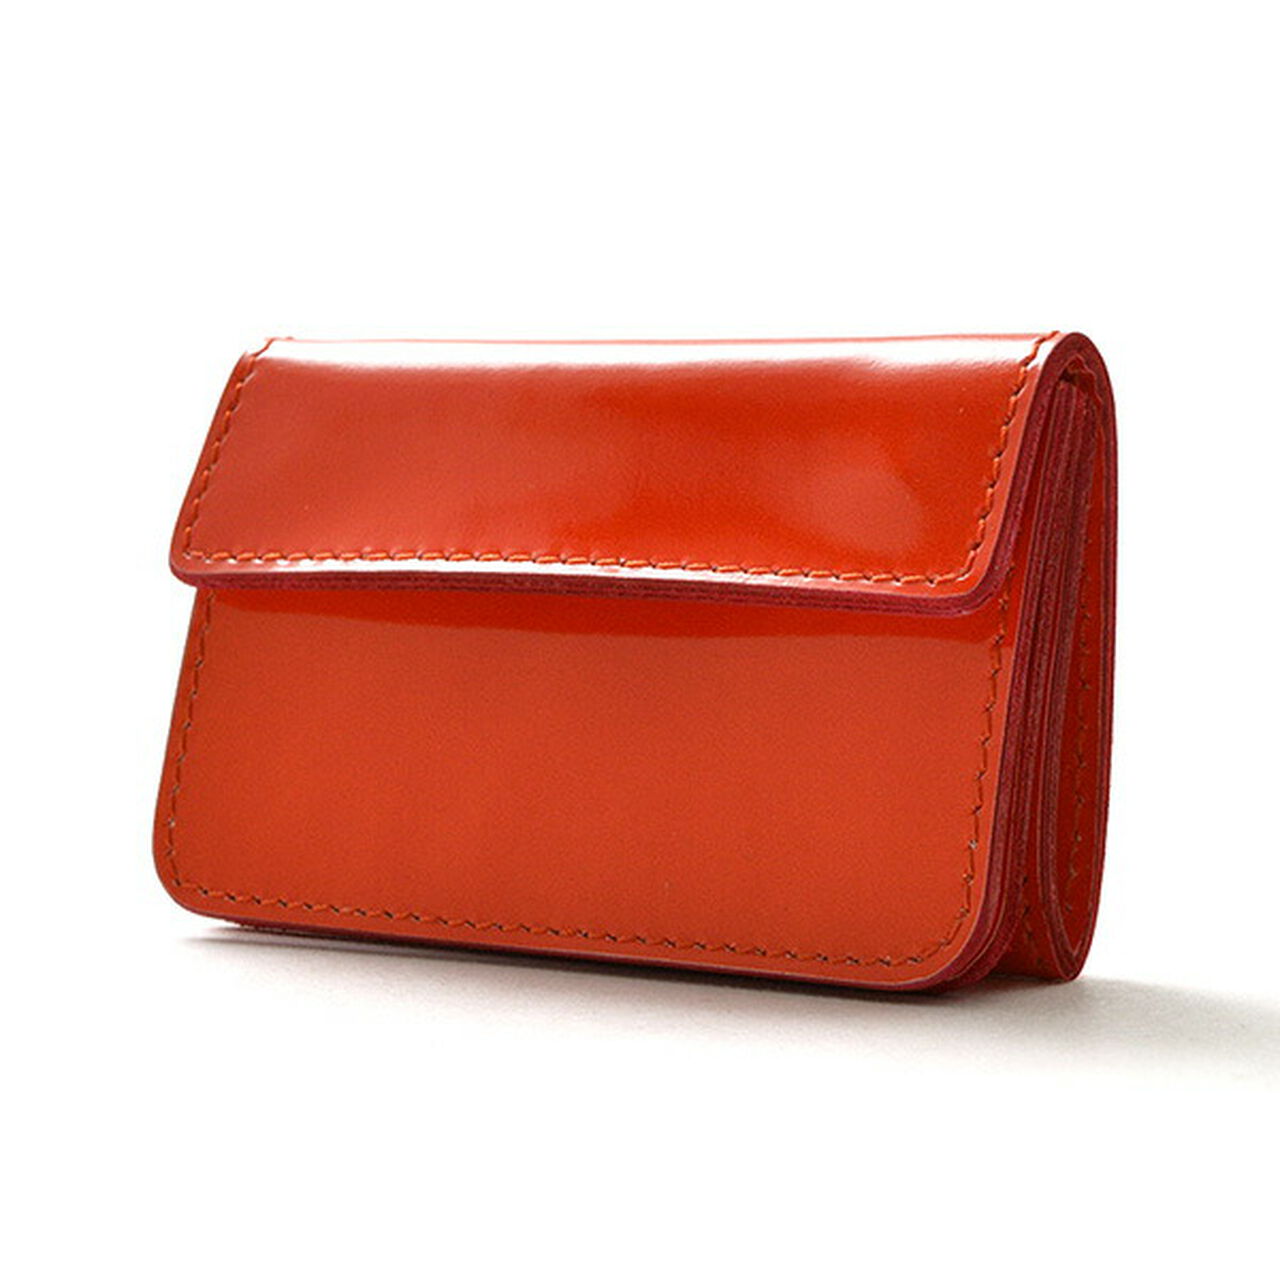 Bellows Compact Wallet,Scarlet, large image number 0